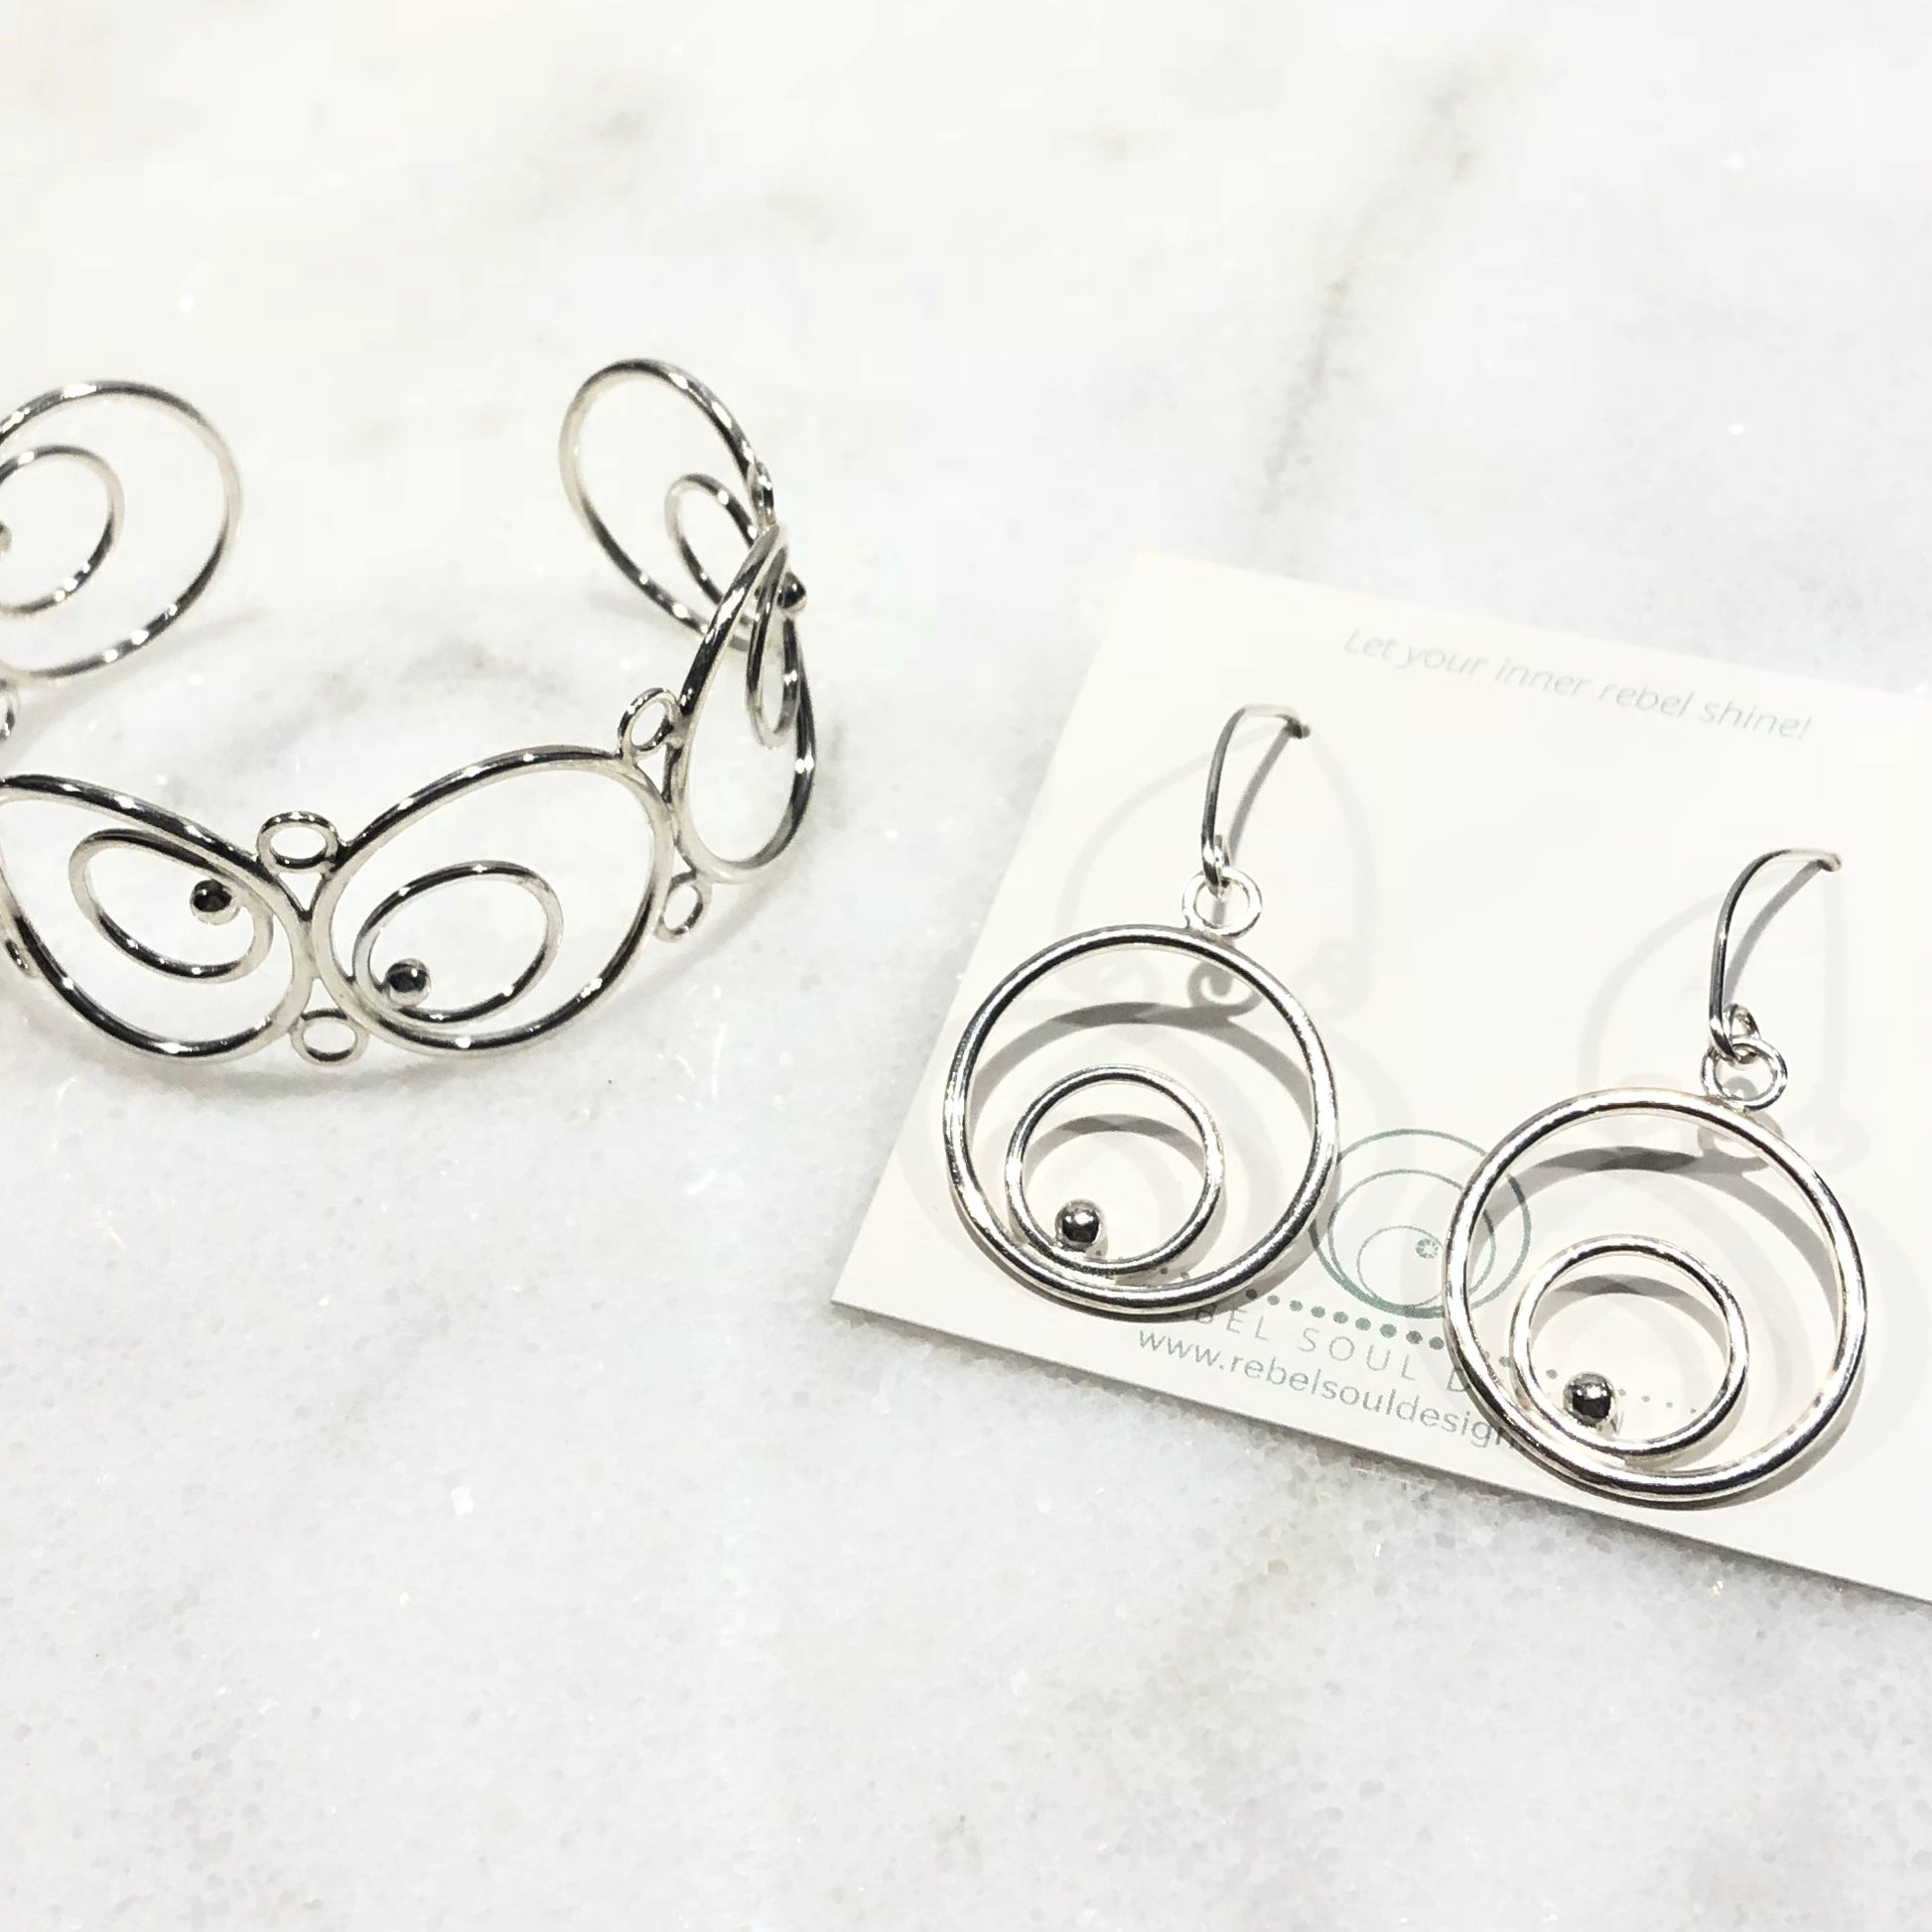 Silver circle drop earrings and matching bracelet